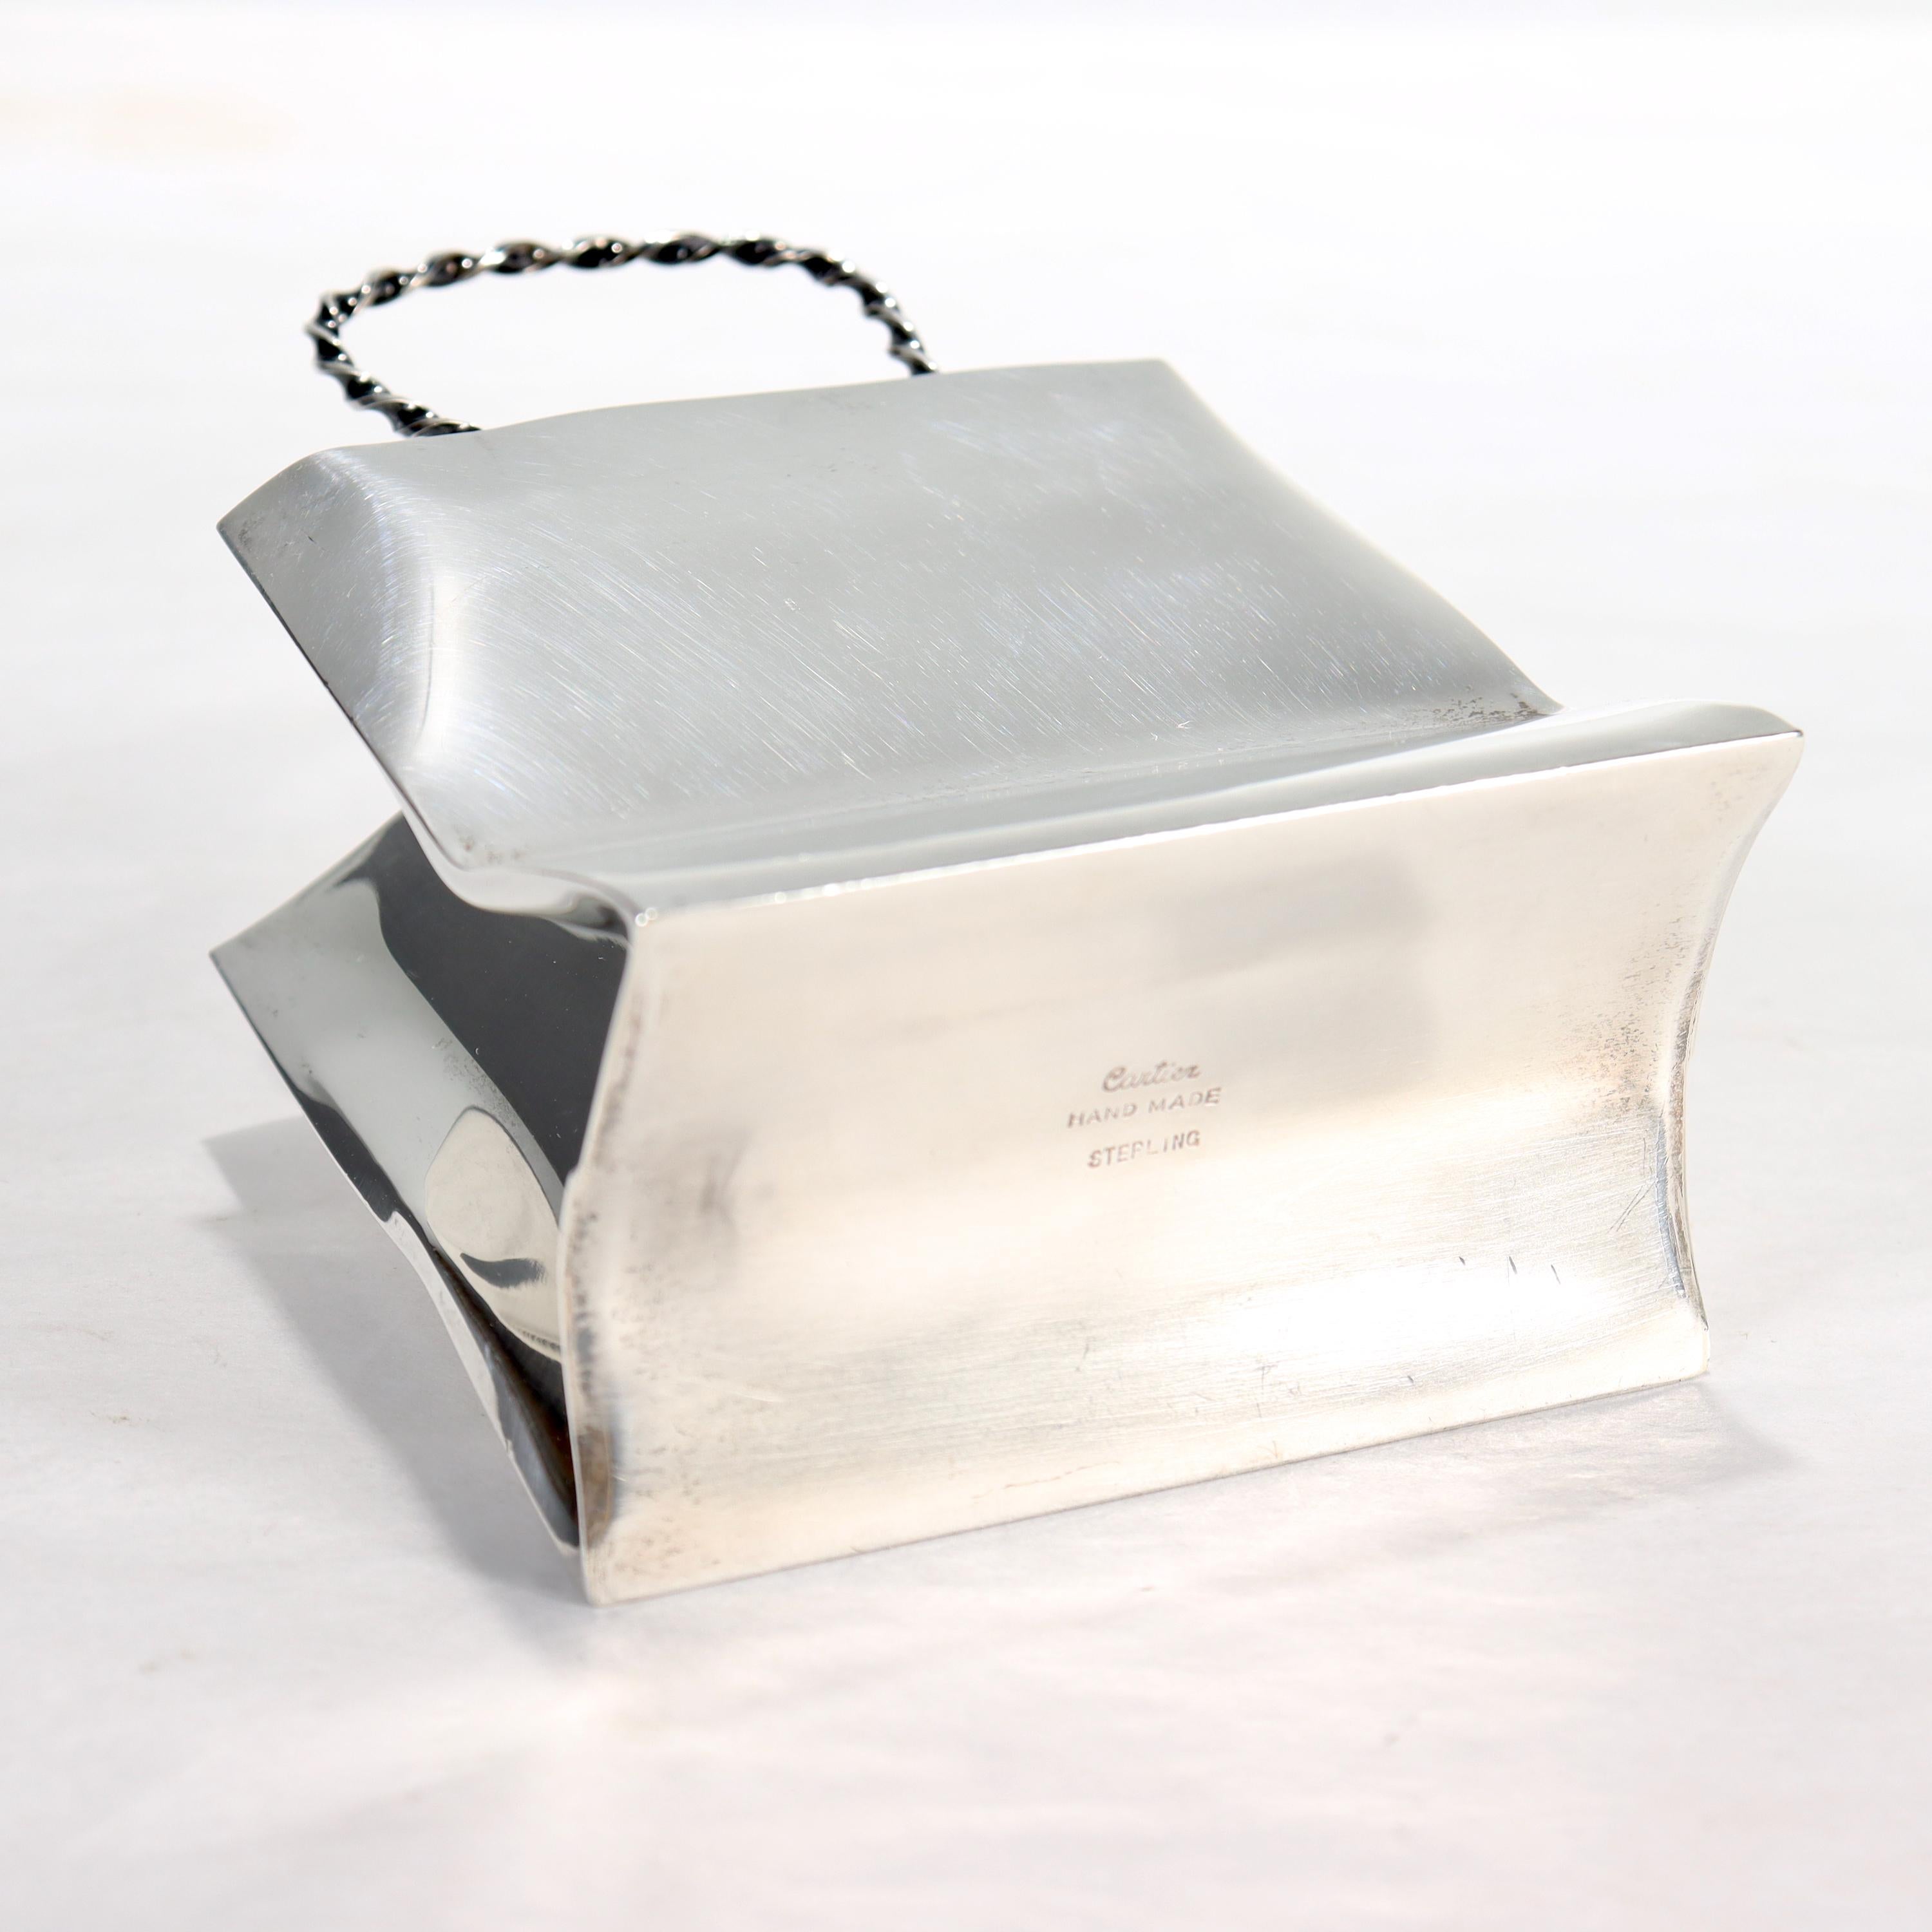 Vintage Cartier Sterling Silver Miniature Shopping or Gift Bag 1